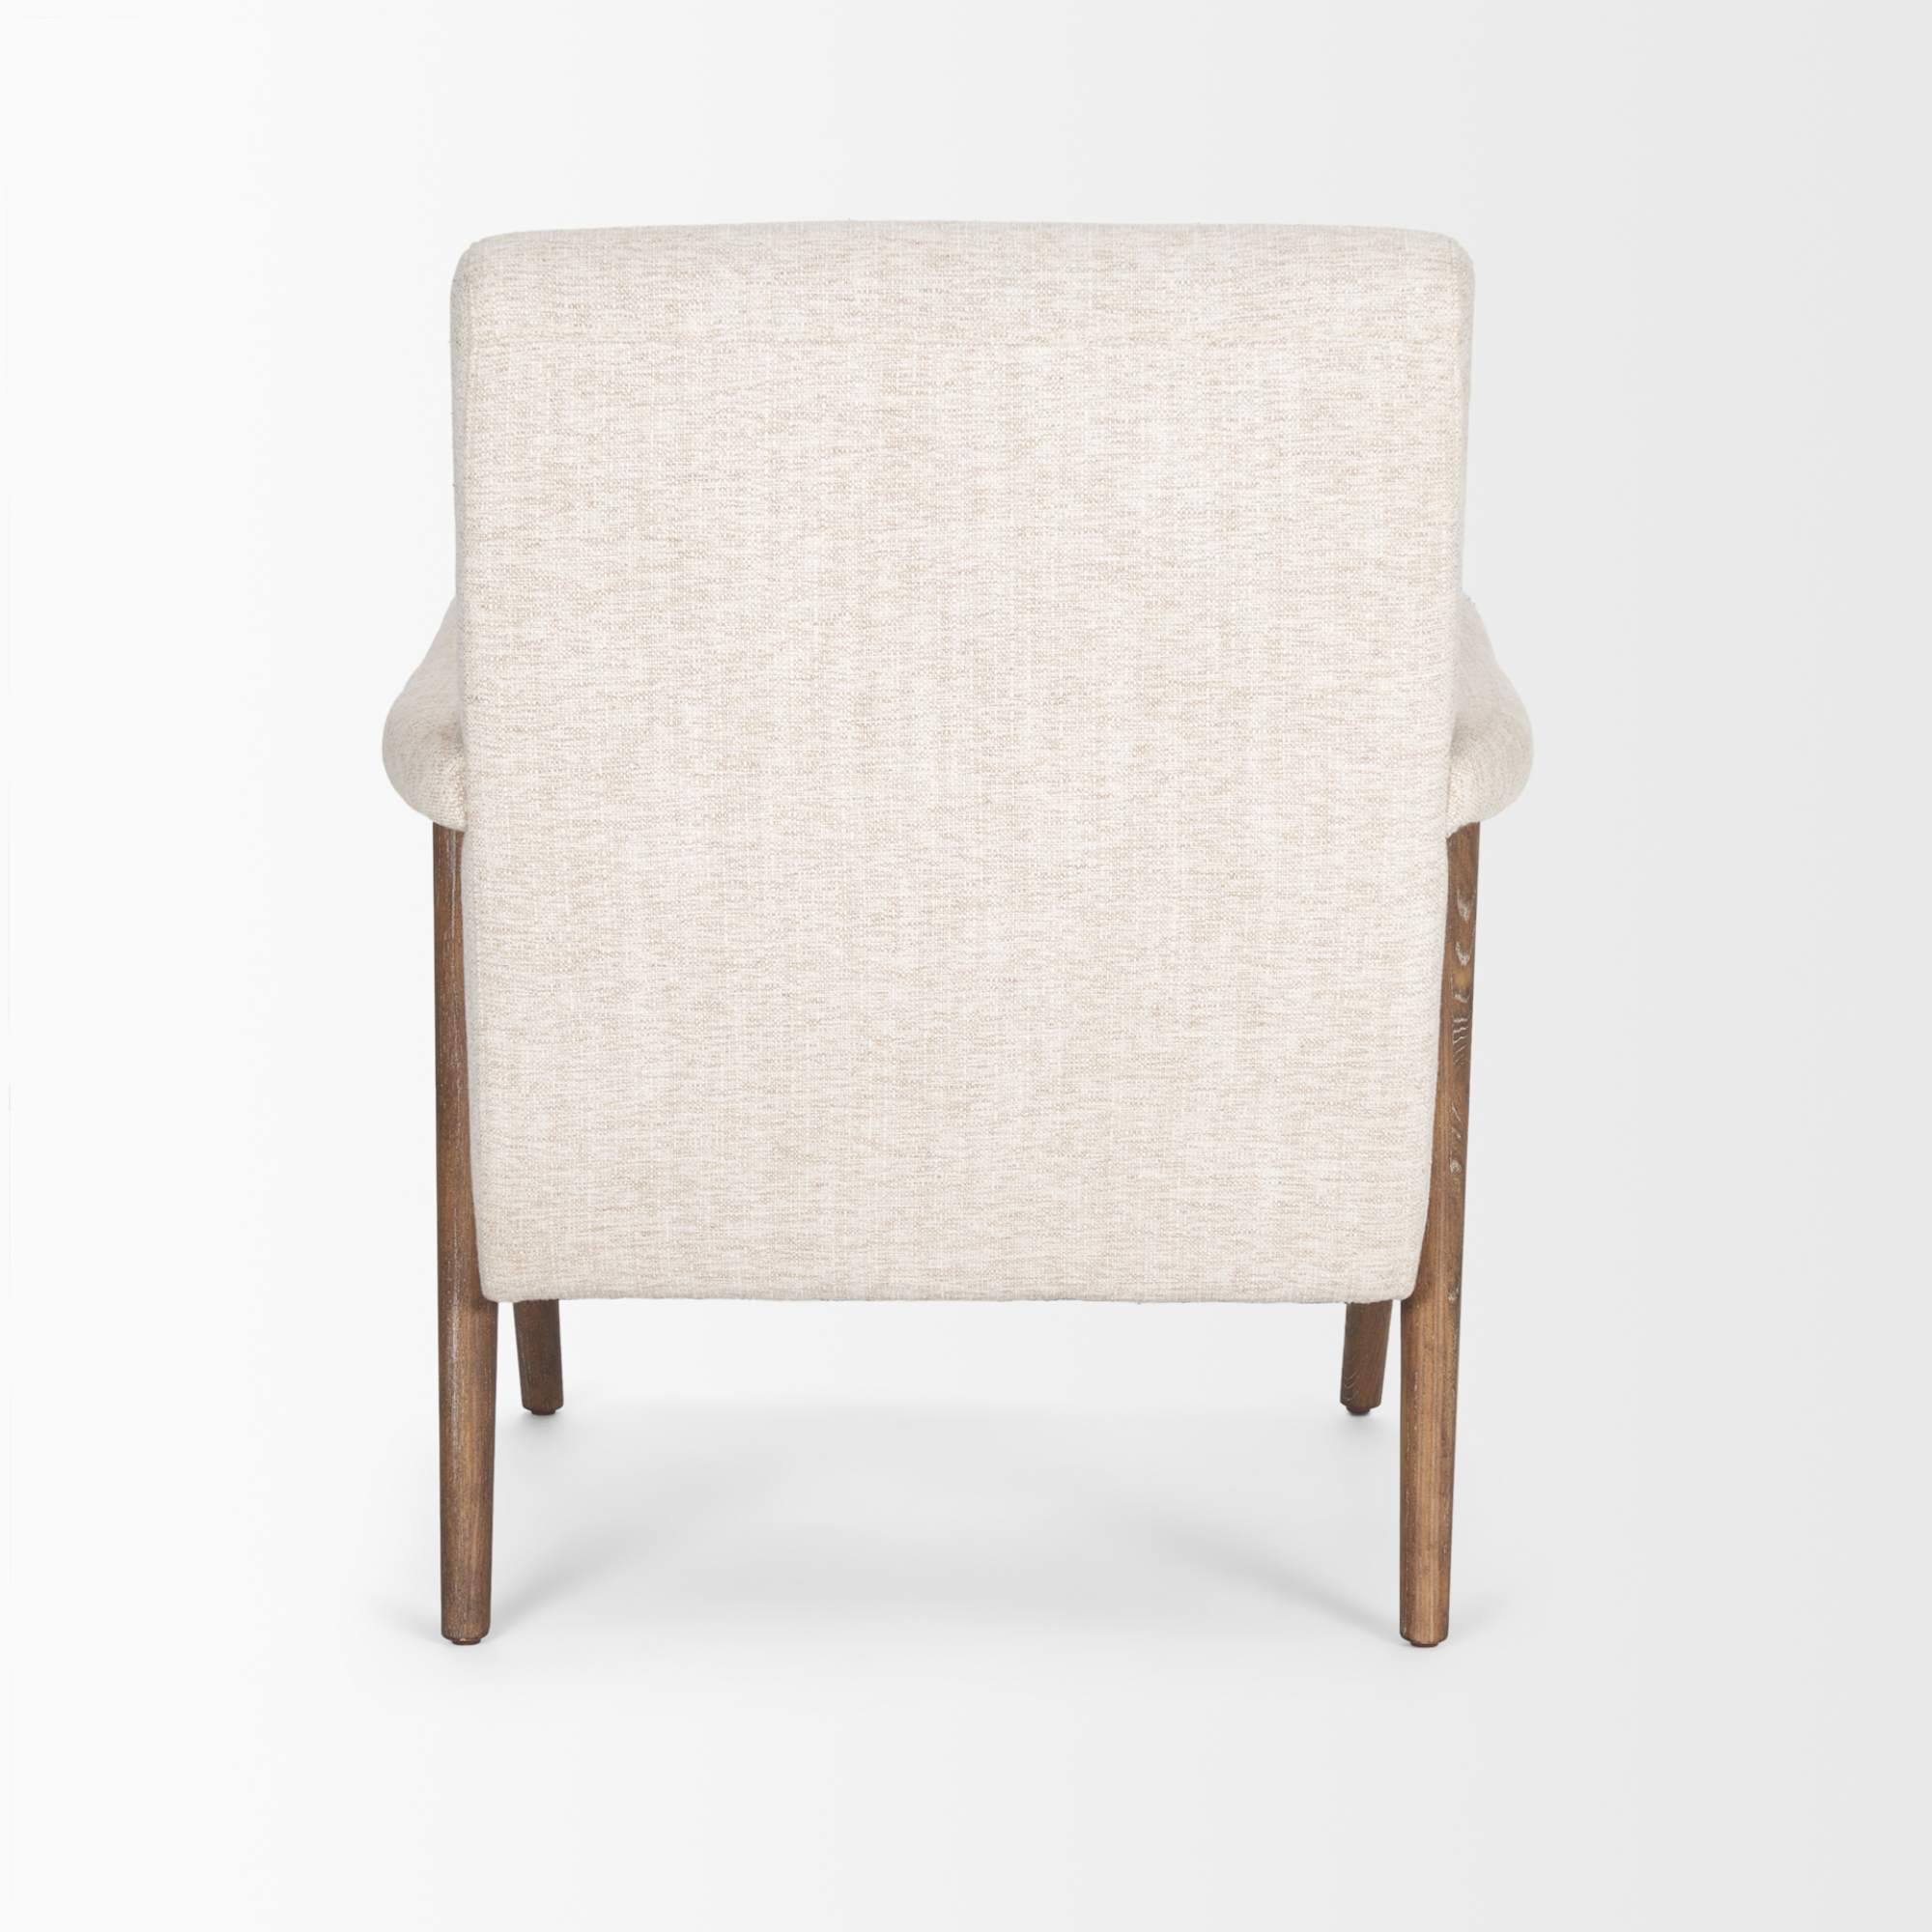 Nicola Accent Chair